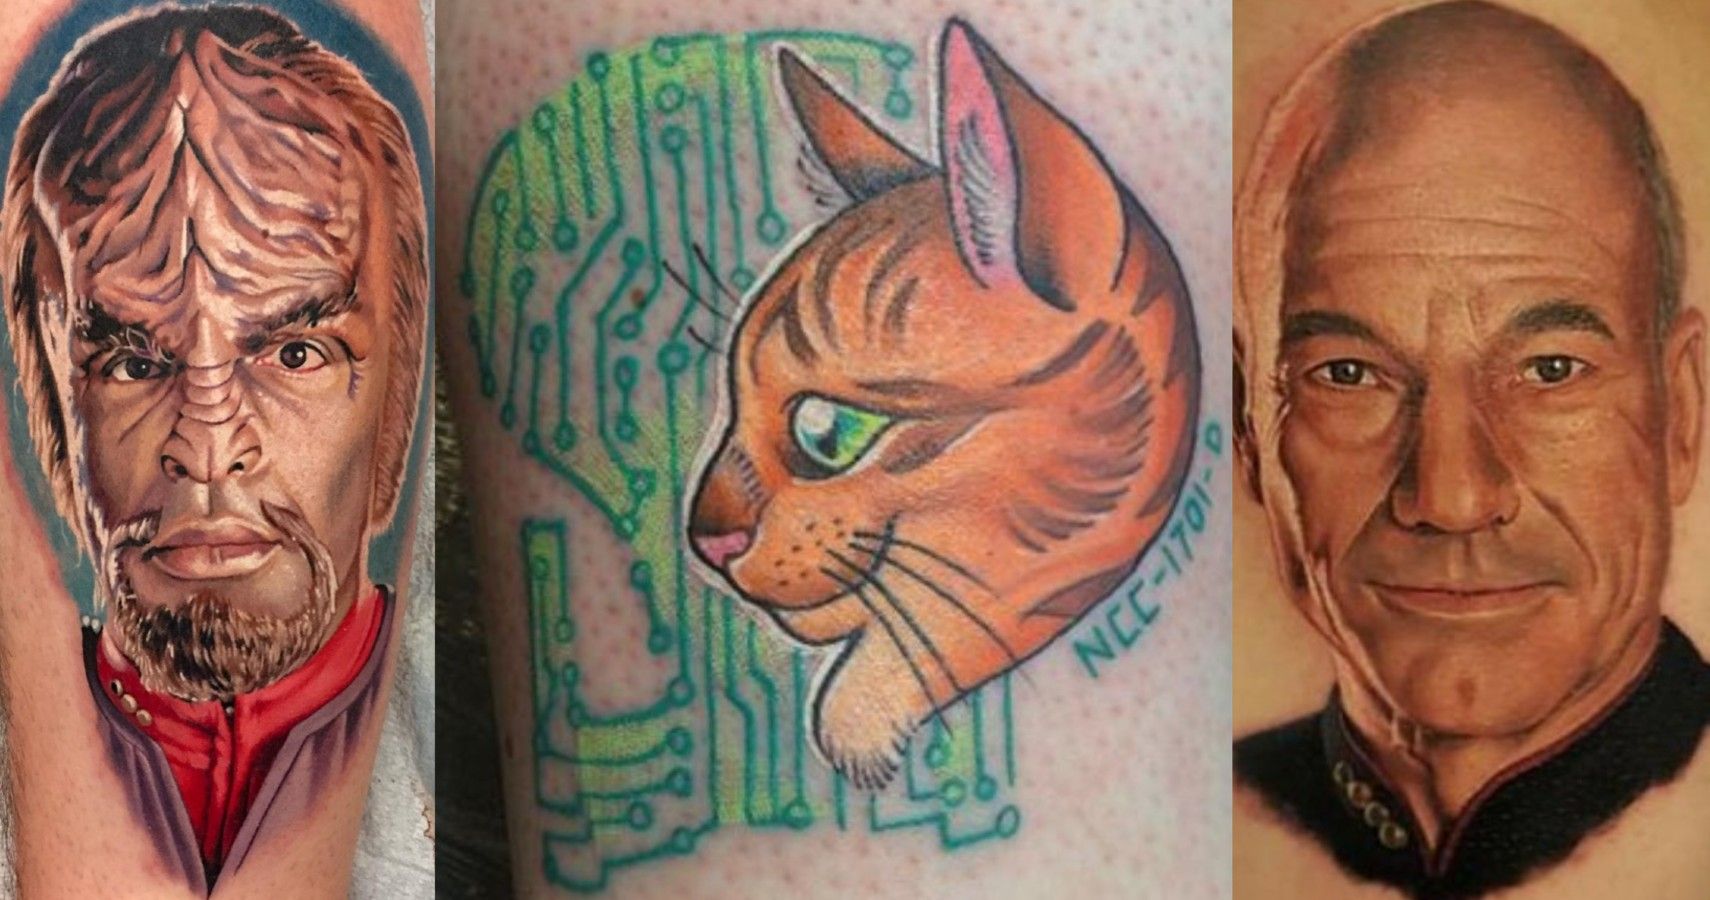 This tattoo is colored with bright yellow ink, and it not every star trek t...